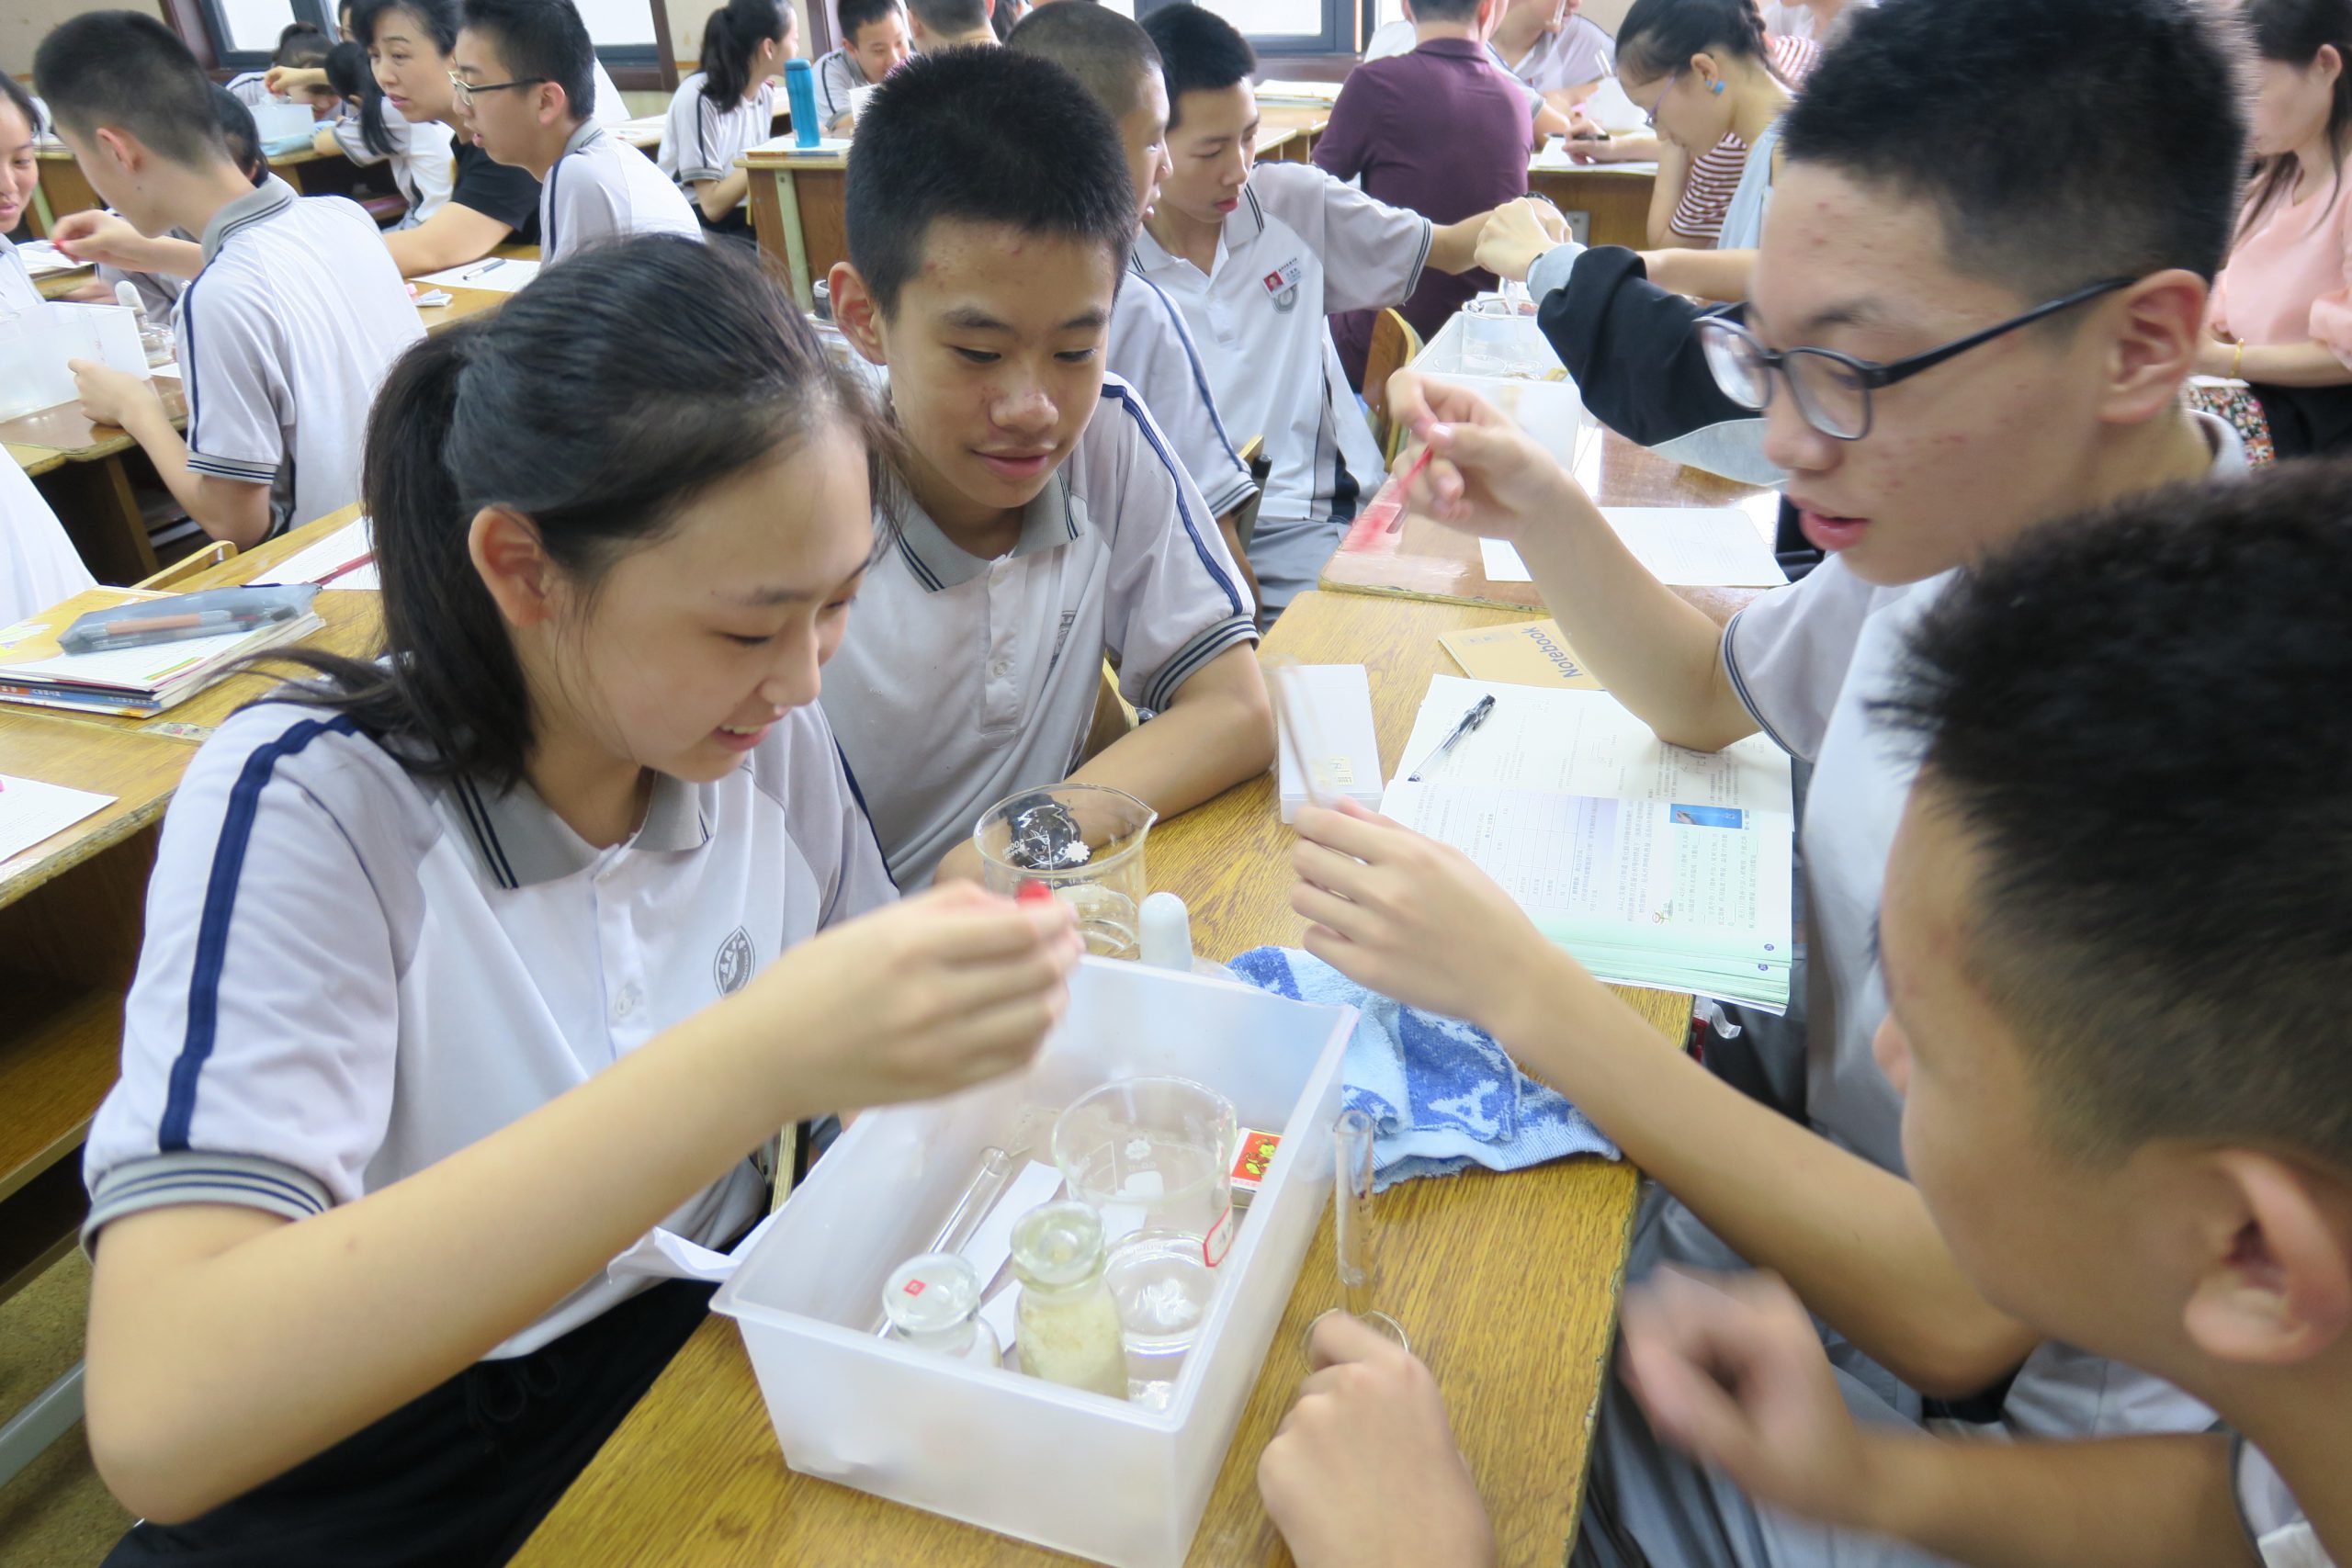 [STEM Education] 科学提升部首次中小学生科学素养提升合作校调研圆满结束<br> The first round of partner schools’ visit for project of improving scientific literacy for all students插图4